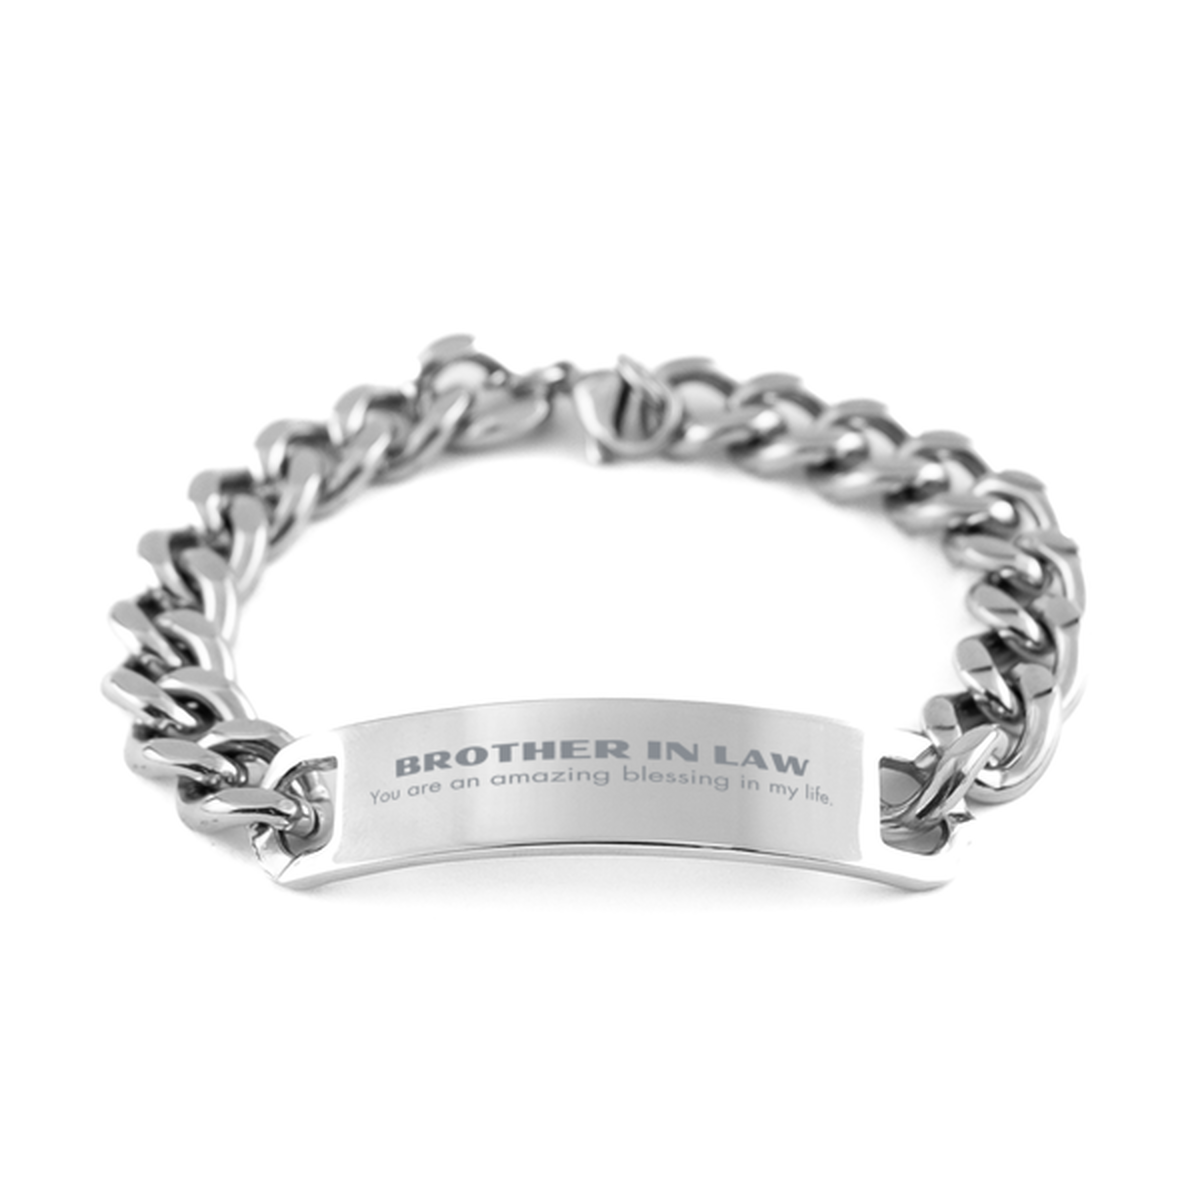 Brother In Law Cuban Chain Stainless Steel Bracelet, You are an amazing blessing in my life, Thank You Gifts For Brother In Law, Inspirational Birthday Christmas Unique Gifts For Brother In Law